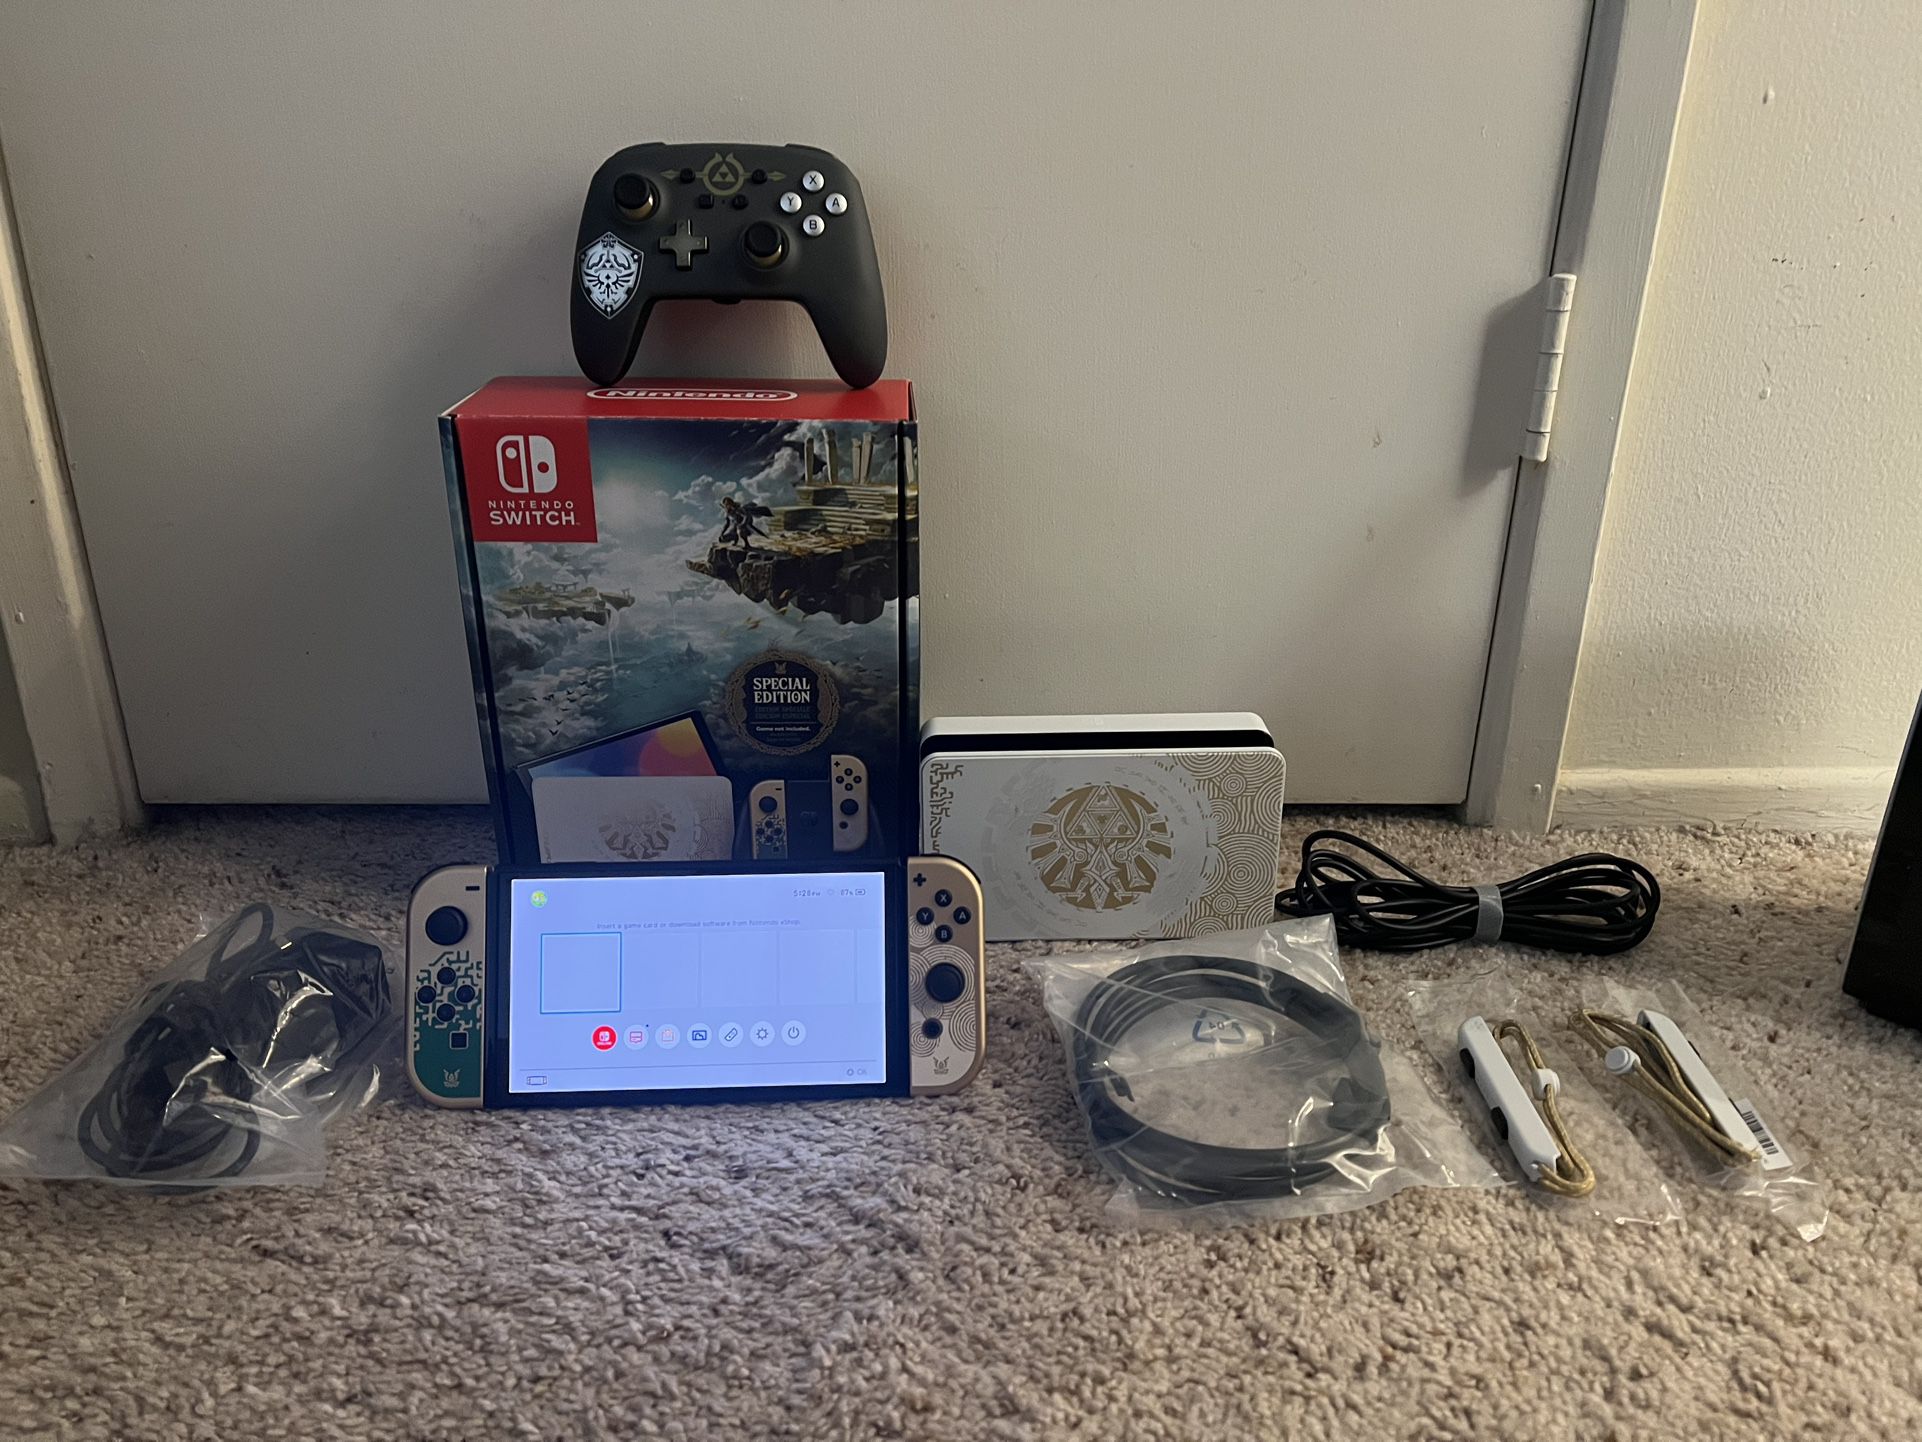 Like New Zelda Tears of the Kingdom Nintendo Switch OLED with original box and all cables